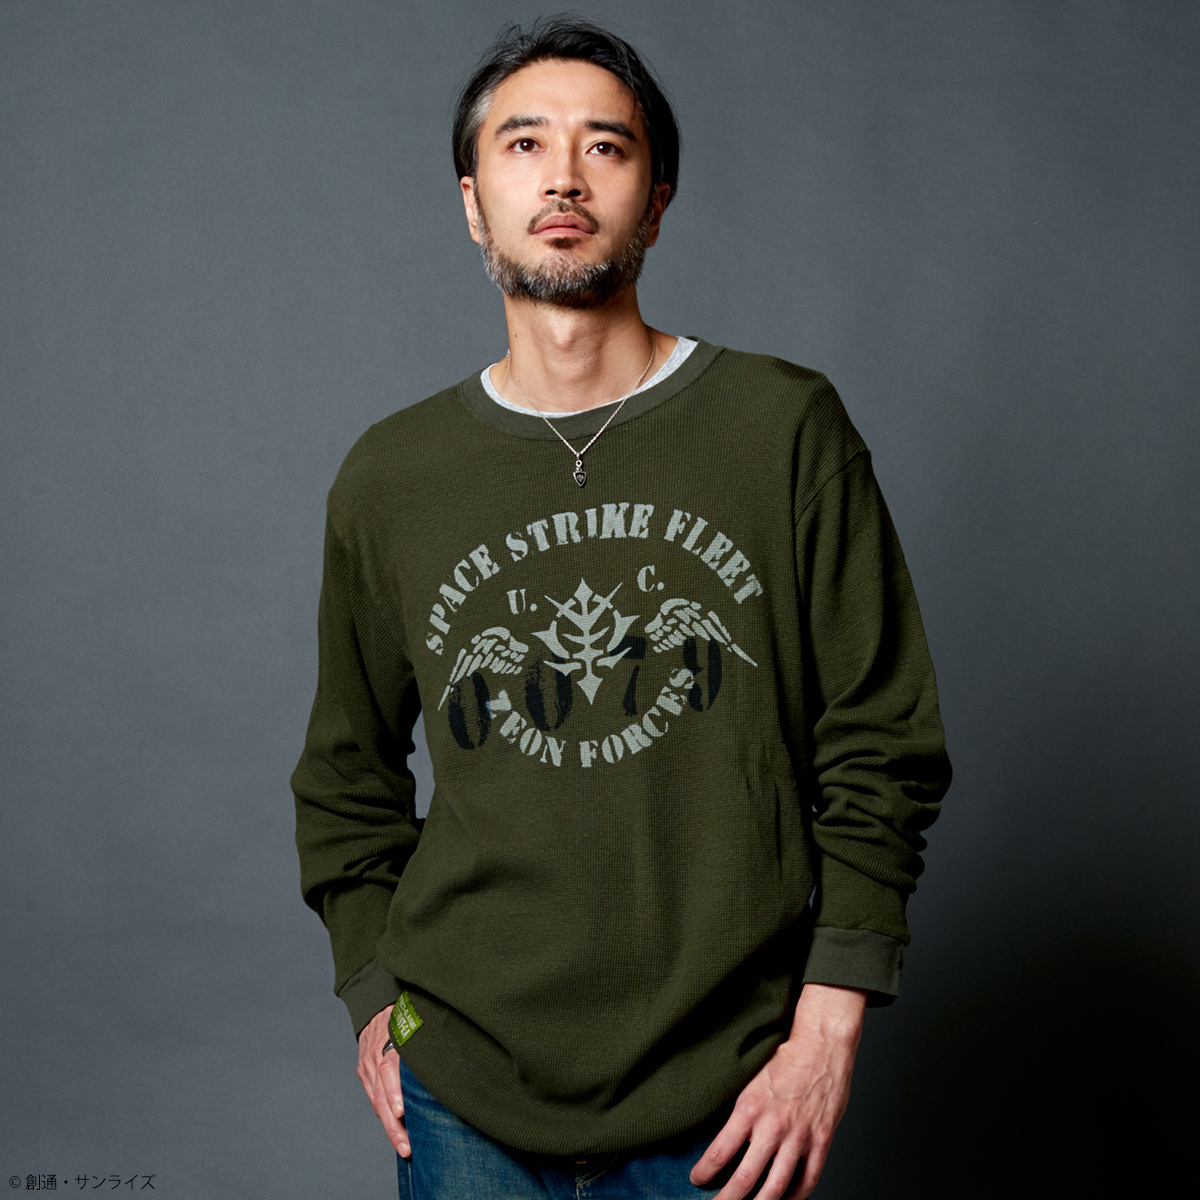 STRICT-G.ARMS『機動戦士ガンダム』 ワッフル長袖Tシャツ ZEON FORCES柄